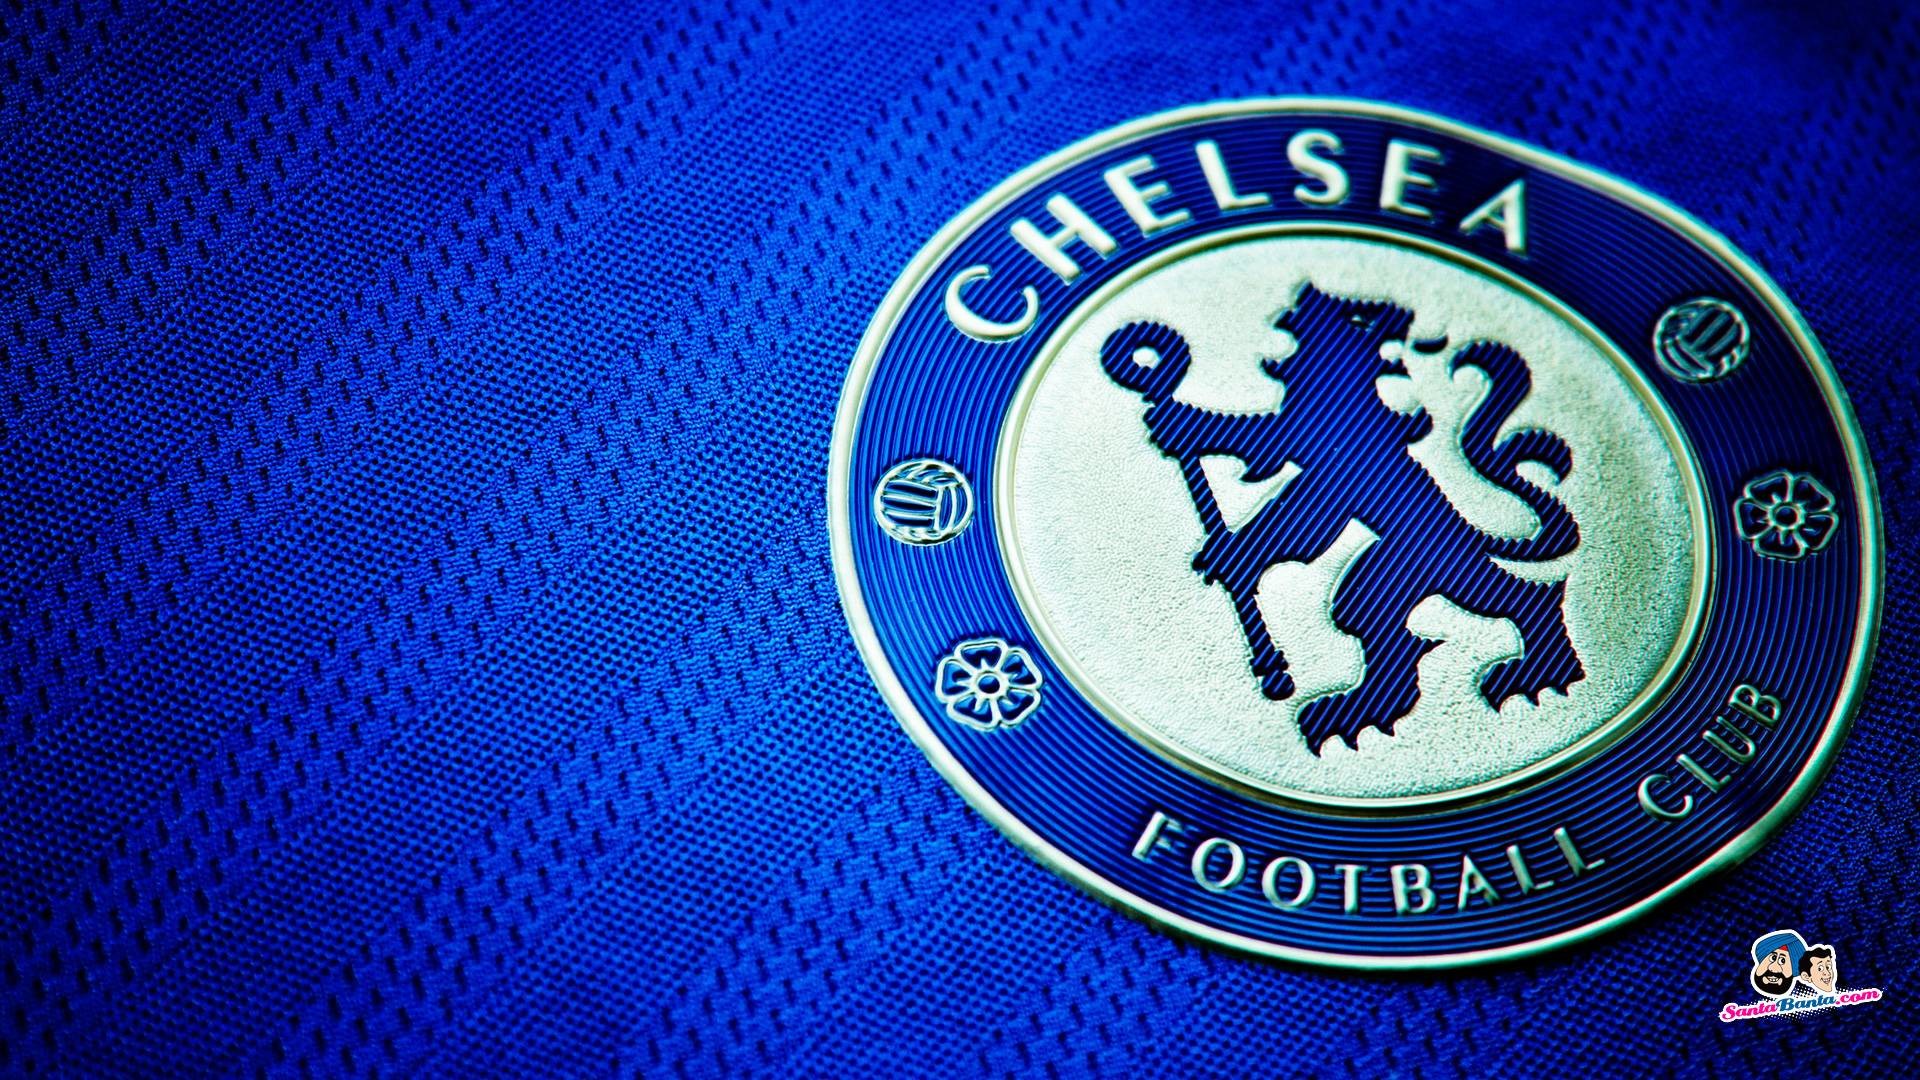 Download wallpapers Chelsea FC, blue background, English football team,  Chelsea FC emblem, Premier League, England, football, Chelsea FC logo for  desktop with resolution 2560x1600. High Quality HD pictures wallpapers